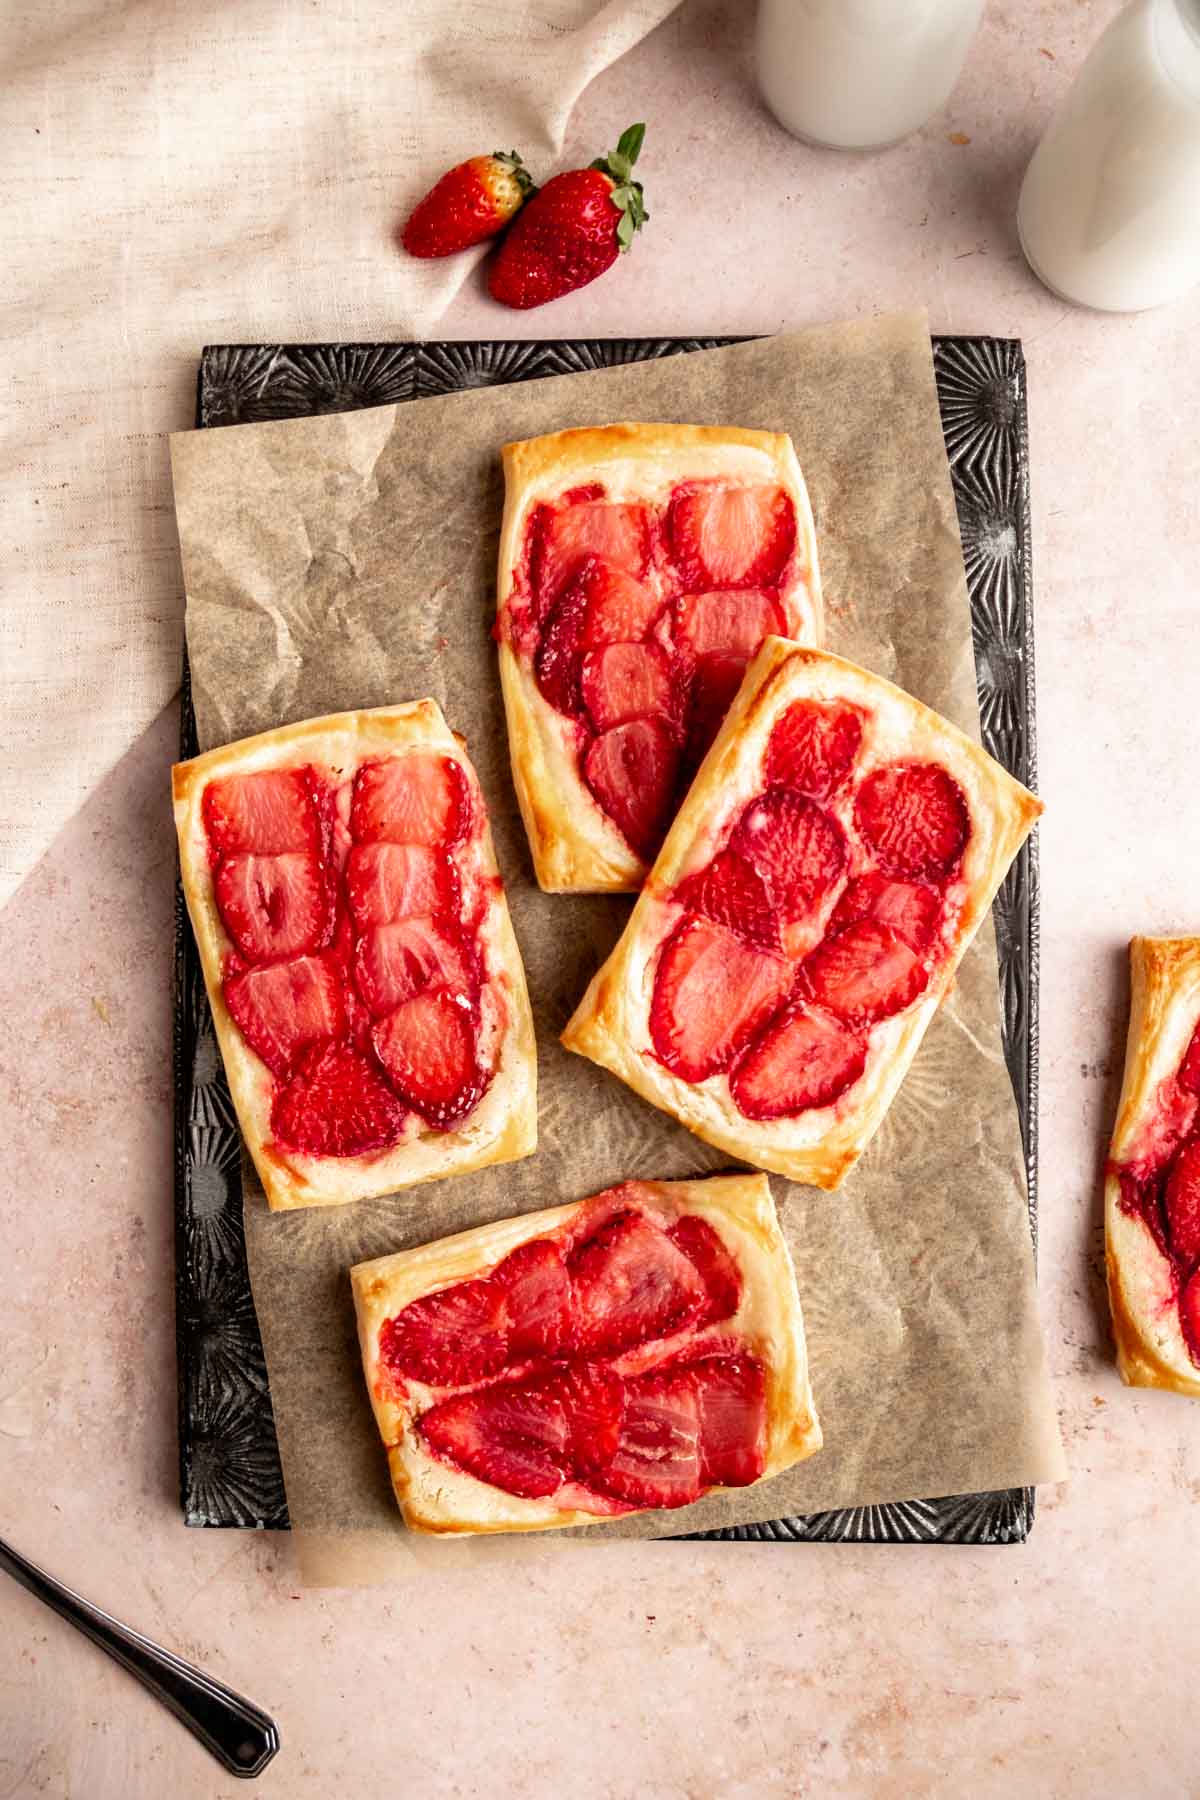 Top of a strawberry danish.